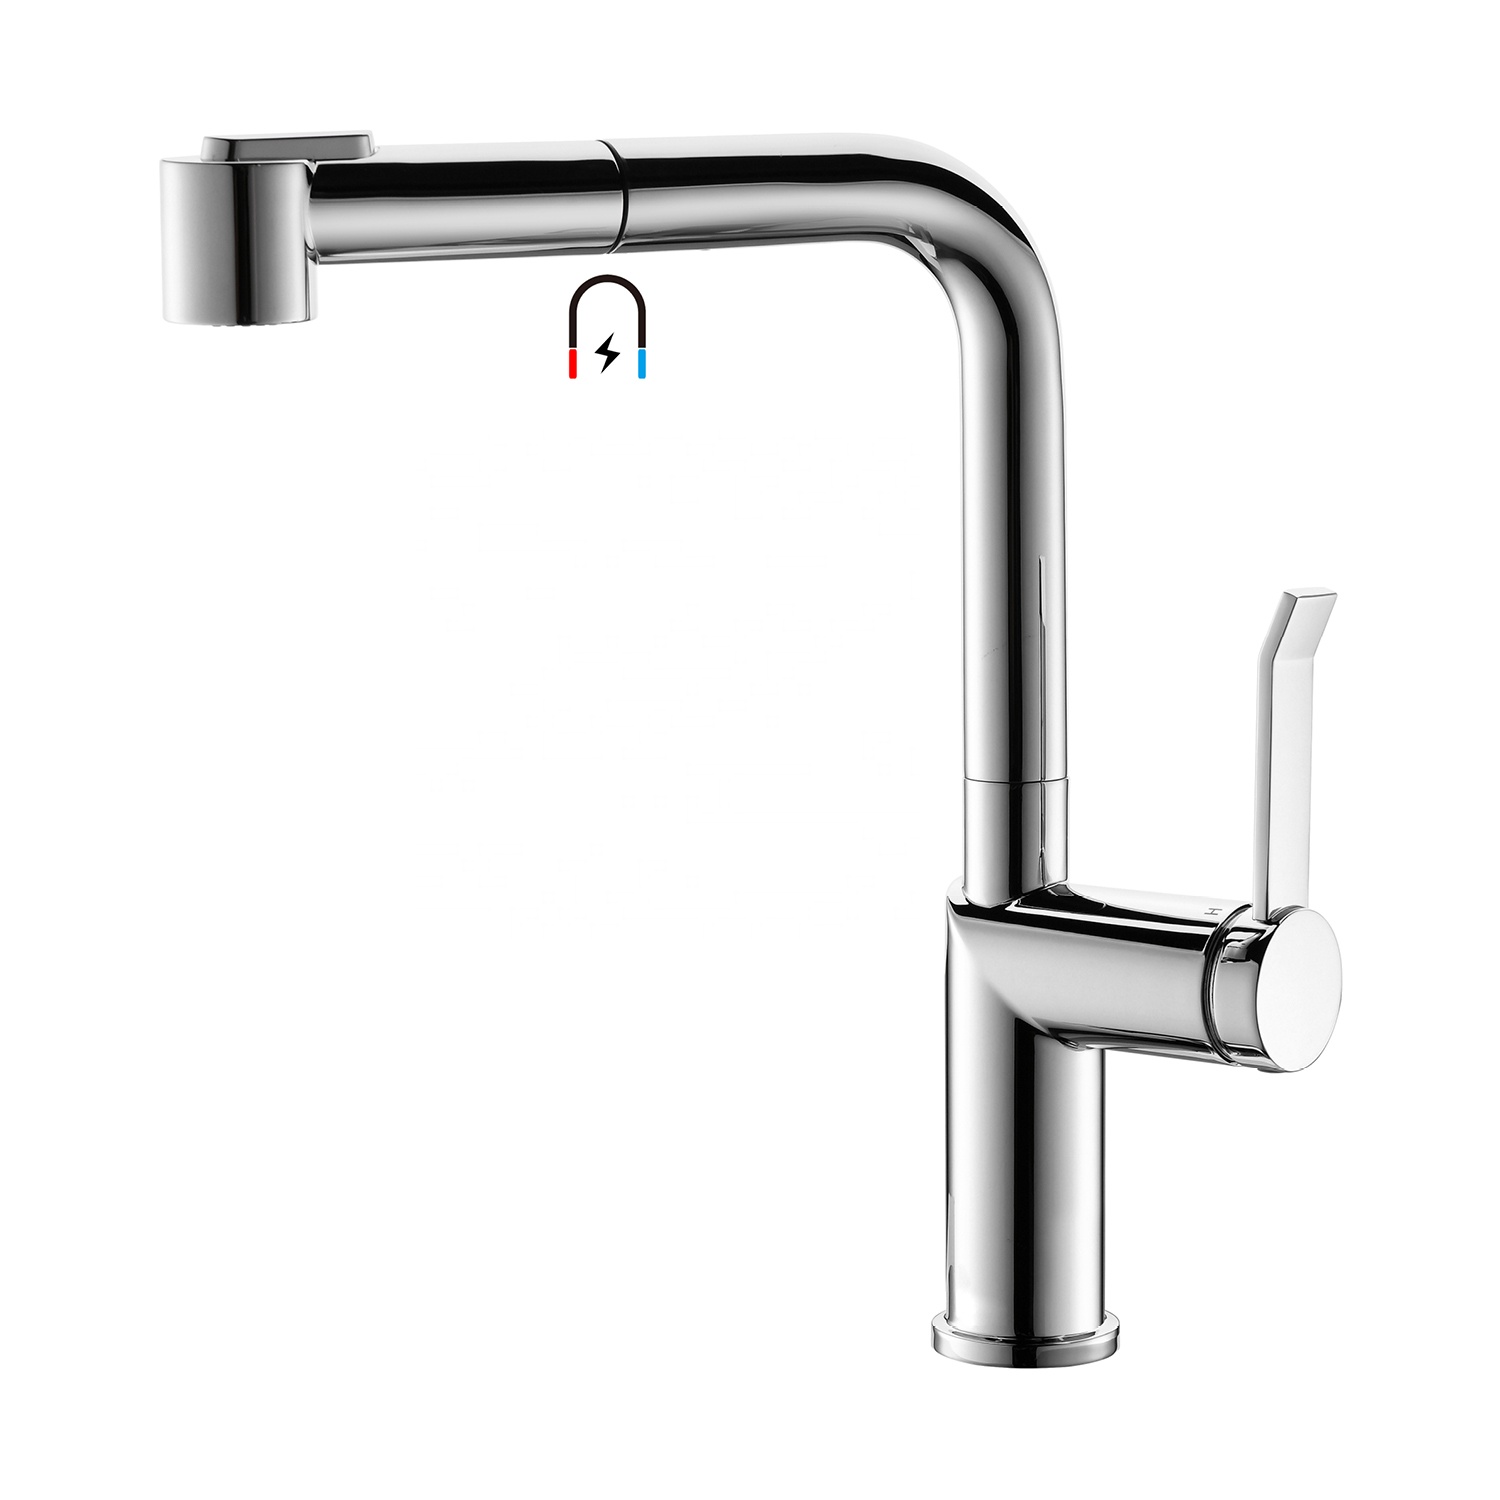 Hot Selling Steel Faucets Kaiping Kitchen Taps Sink Faucet Fashion Pull Kitchen Faucet